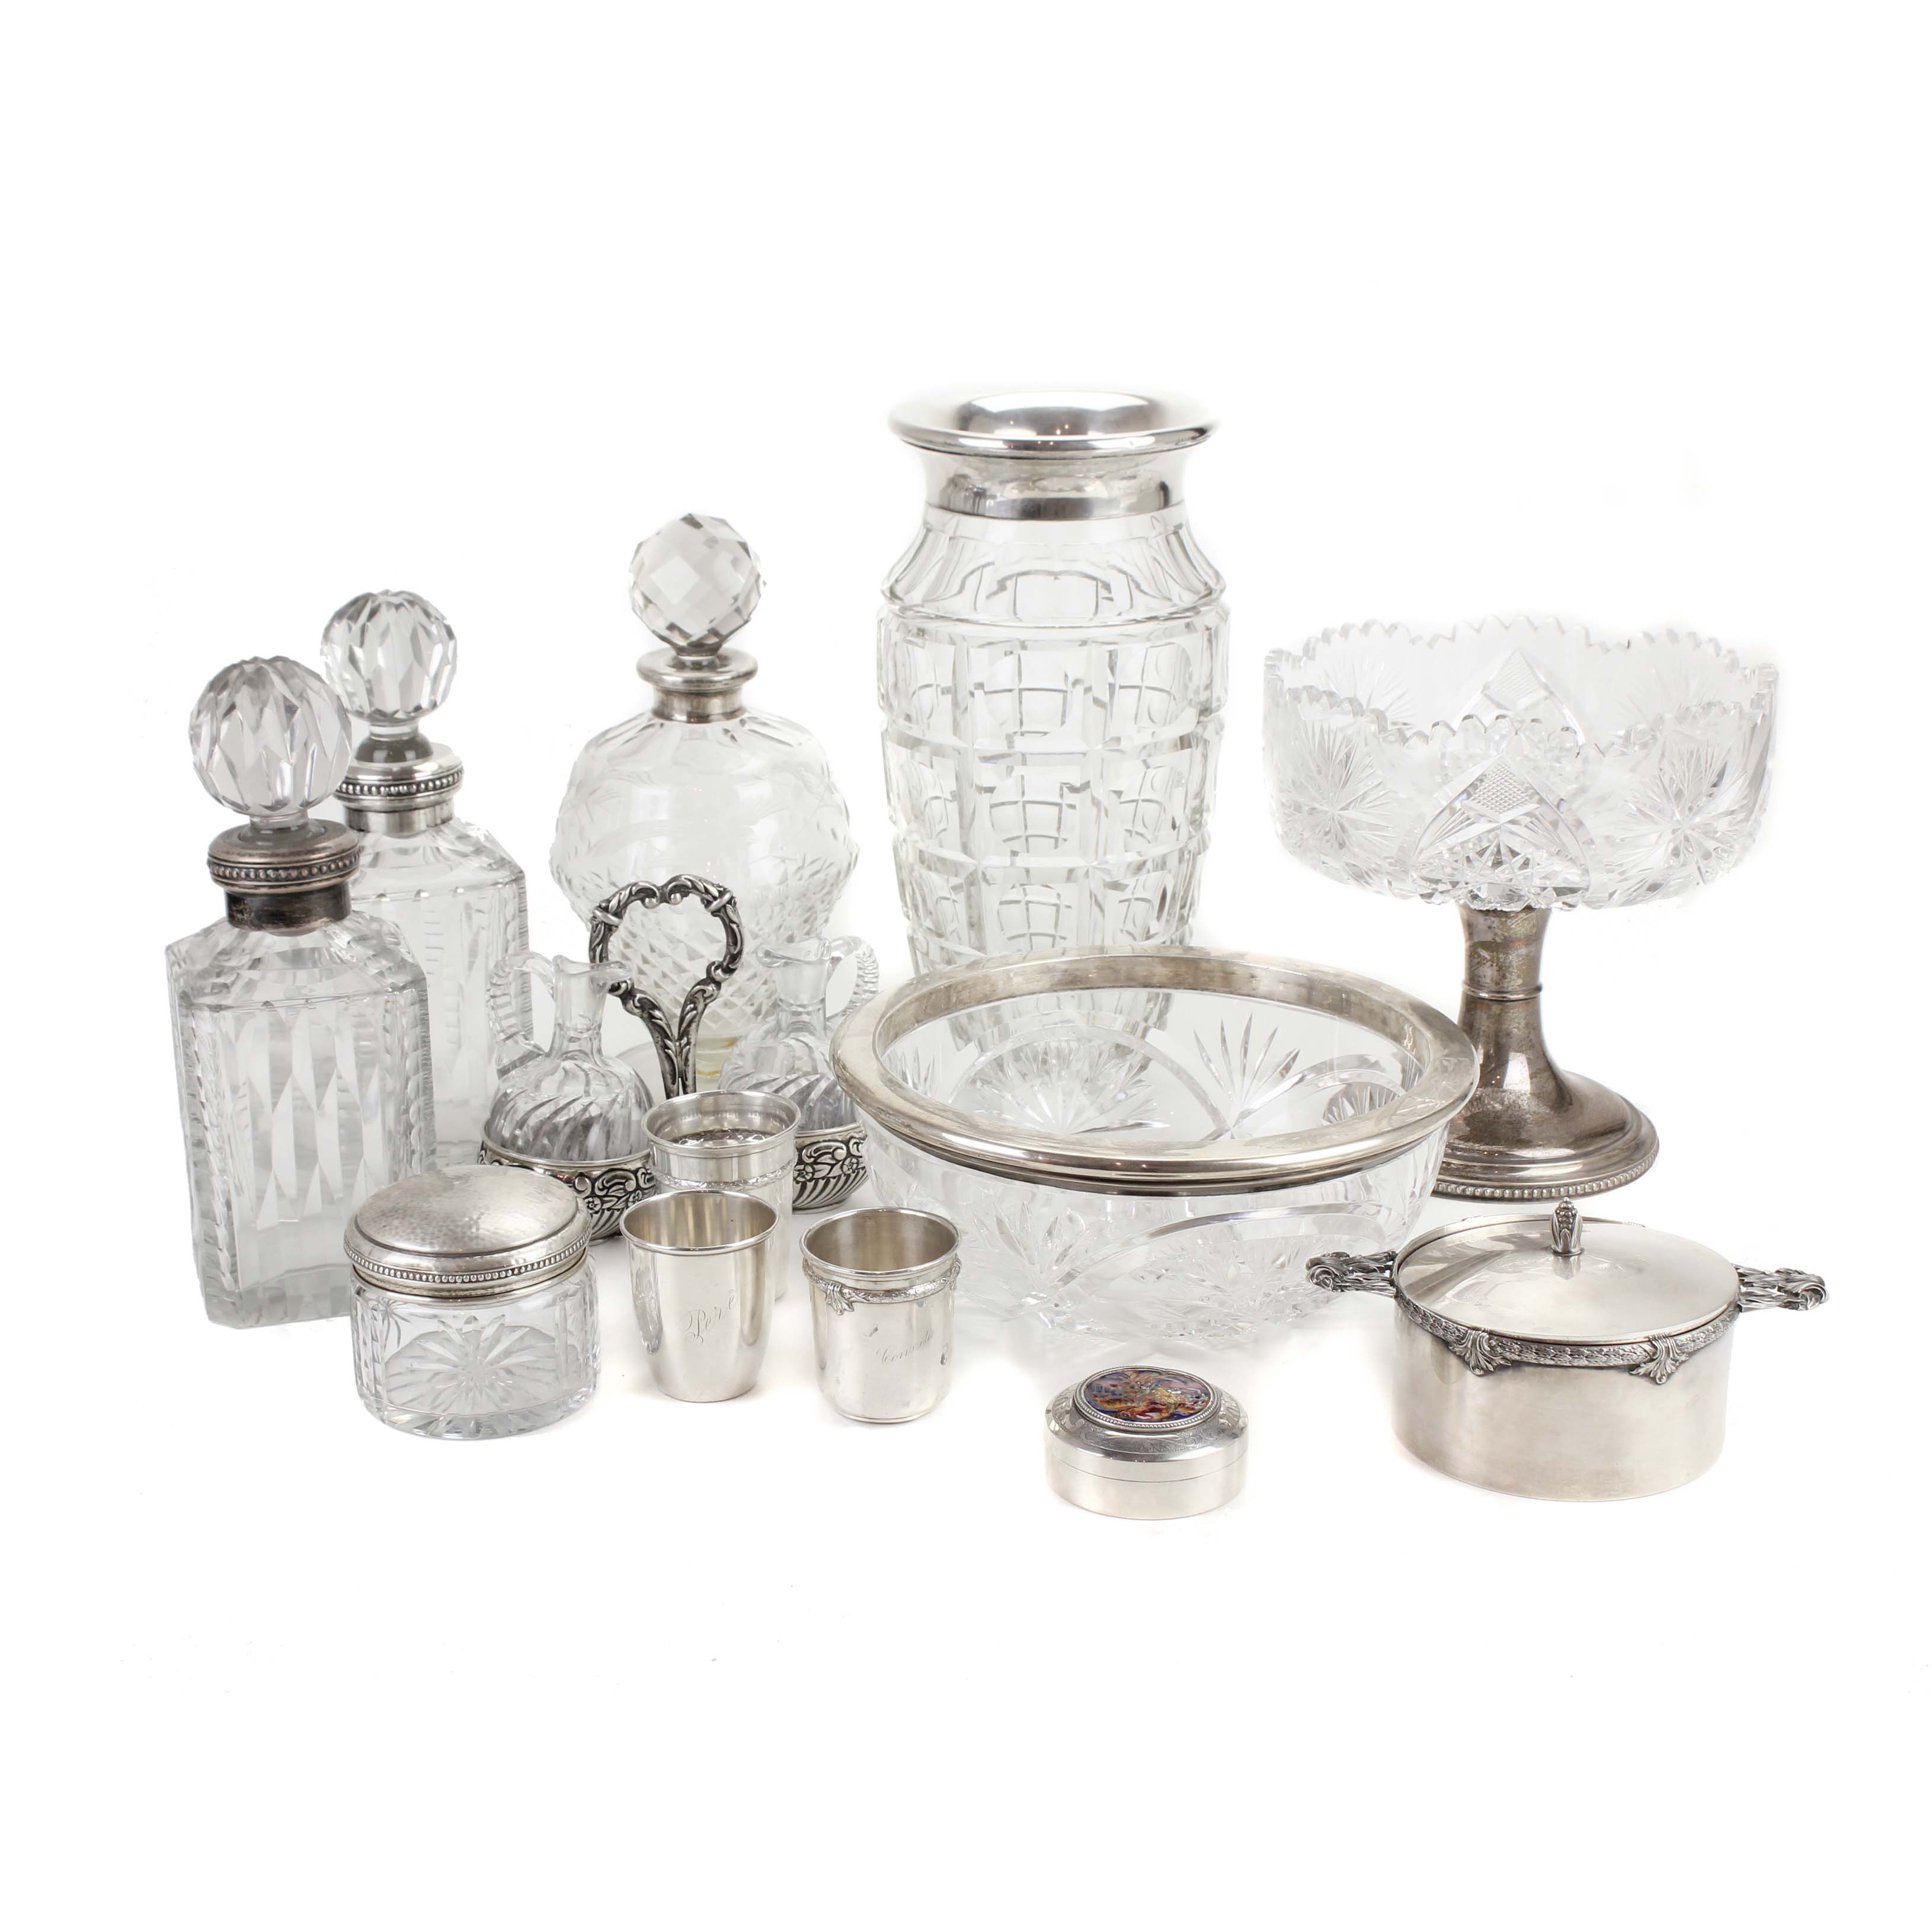 LOT OF SILVER AND CUT CRYSTAL WARE, SECOND HALF C20th.